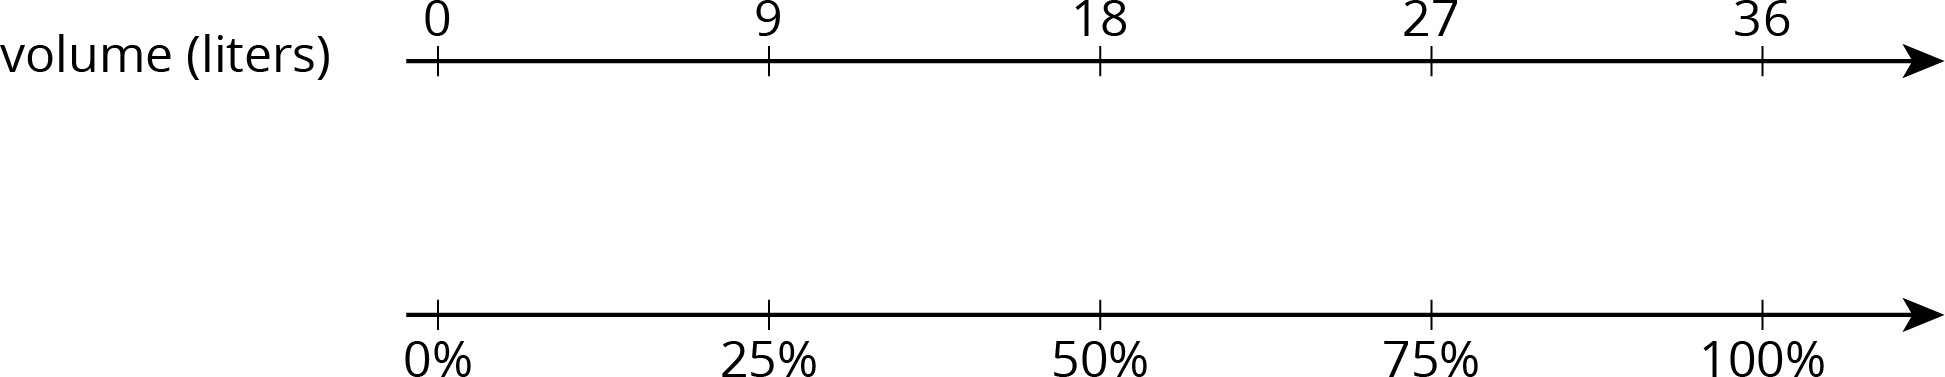 A double number line with 5 evenly spaced tick marks. The top number line is labeled “volume, in liters” and starting with the first tick mark, 0, 9, 18, 27, and 36 are labeled. The bottom number line is not labeled and starting with the first tick mark 0, 25 percent, 50 percent, 75 percent, and 100 percent are labeled.